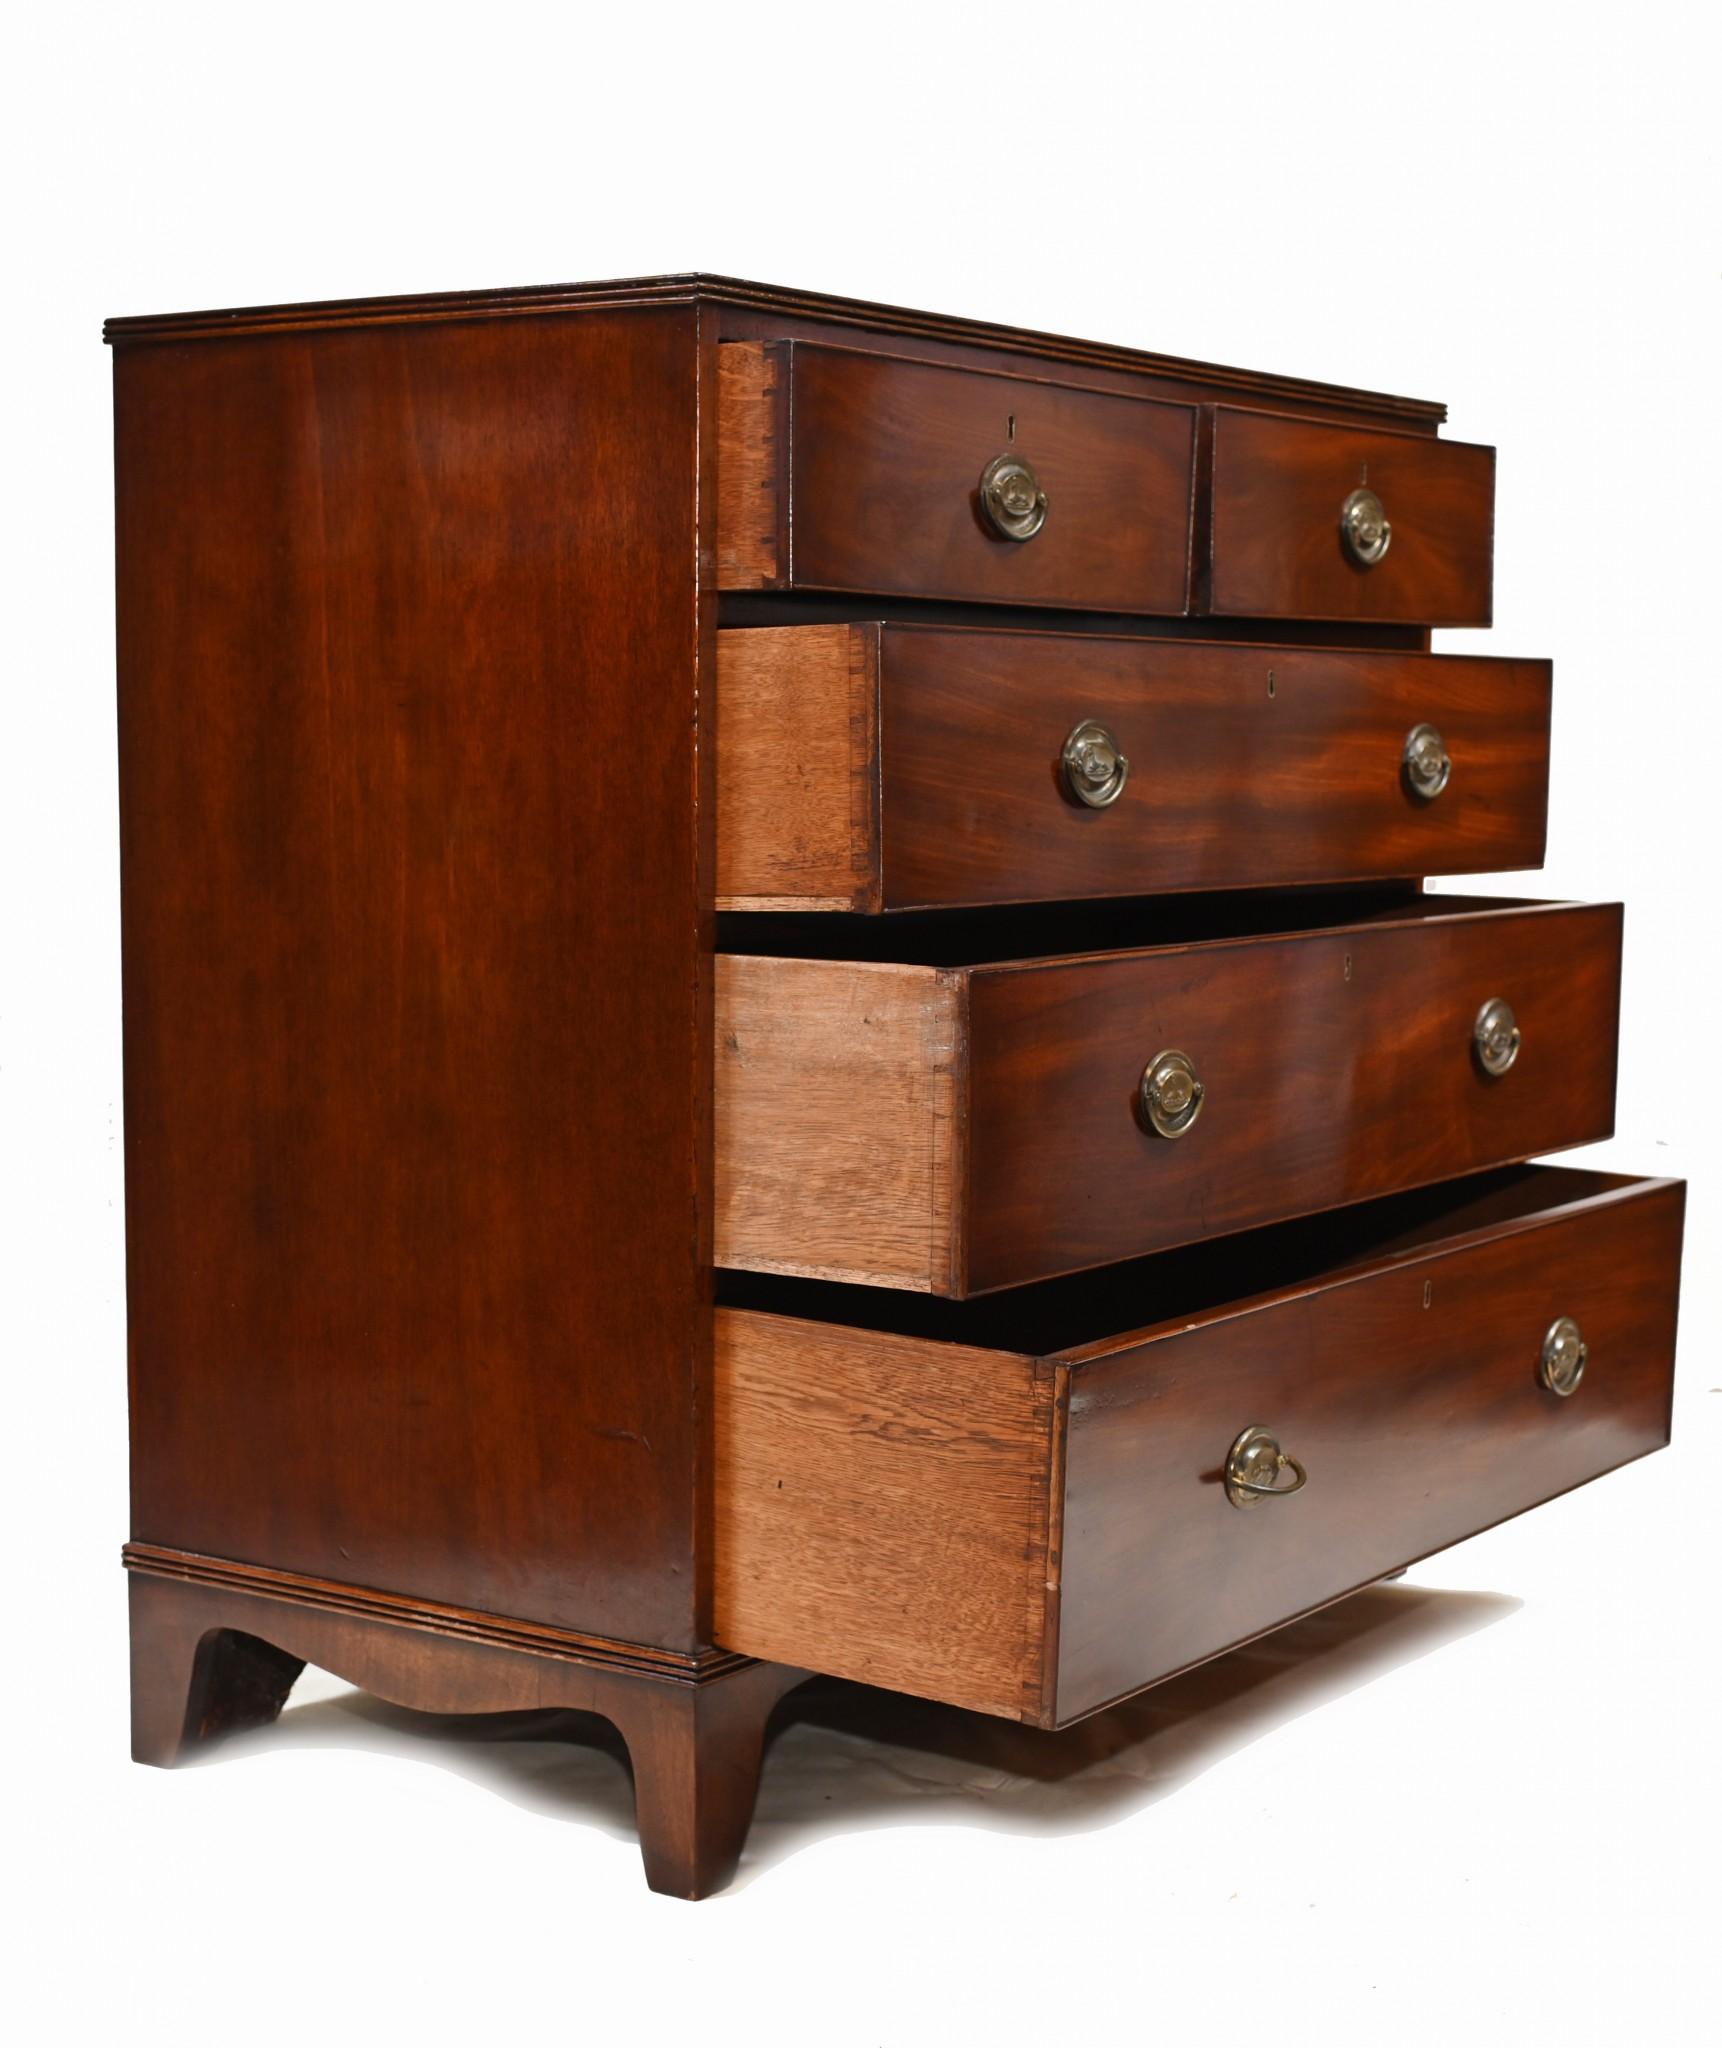 Early 19th Century Antique Georgian Chest of Drawers Mahogany Hepplewhite For Sale